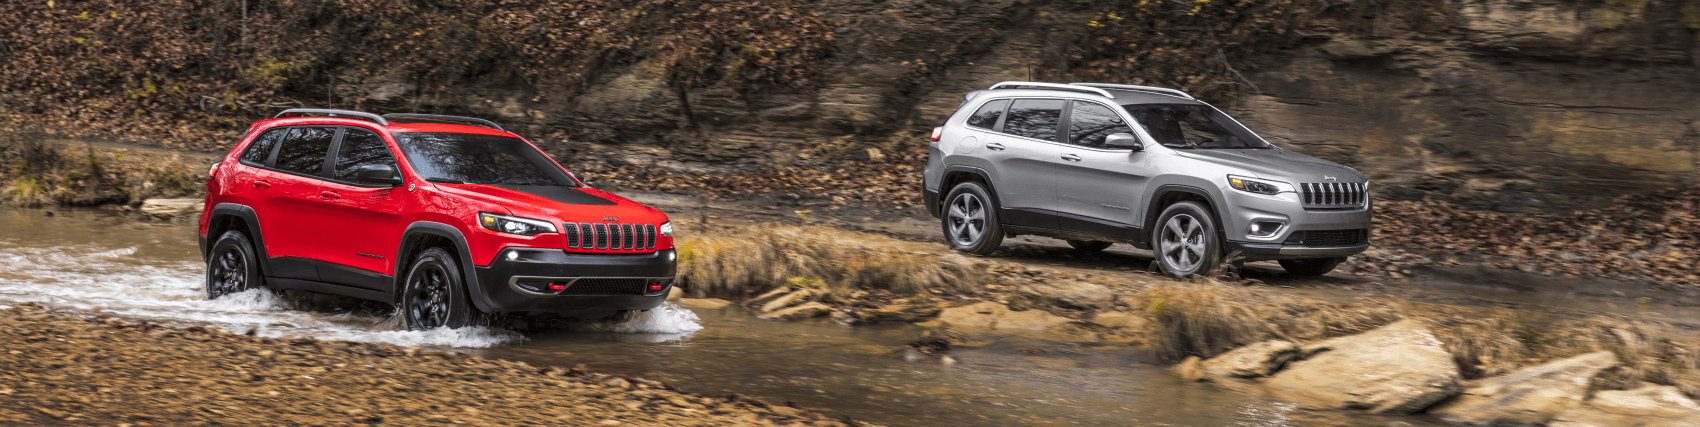 2021 Jeep Cherokee Red Silver Stream